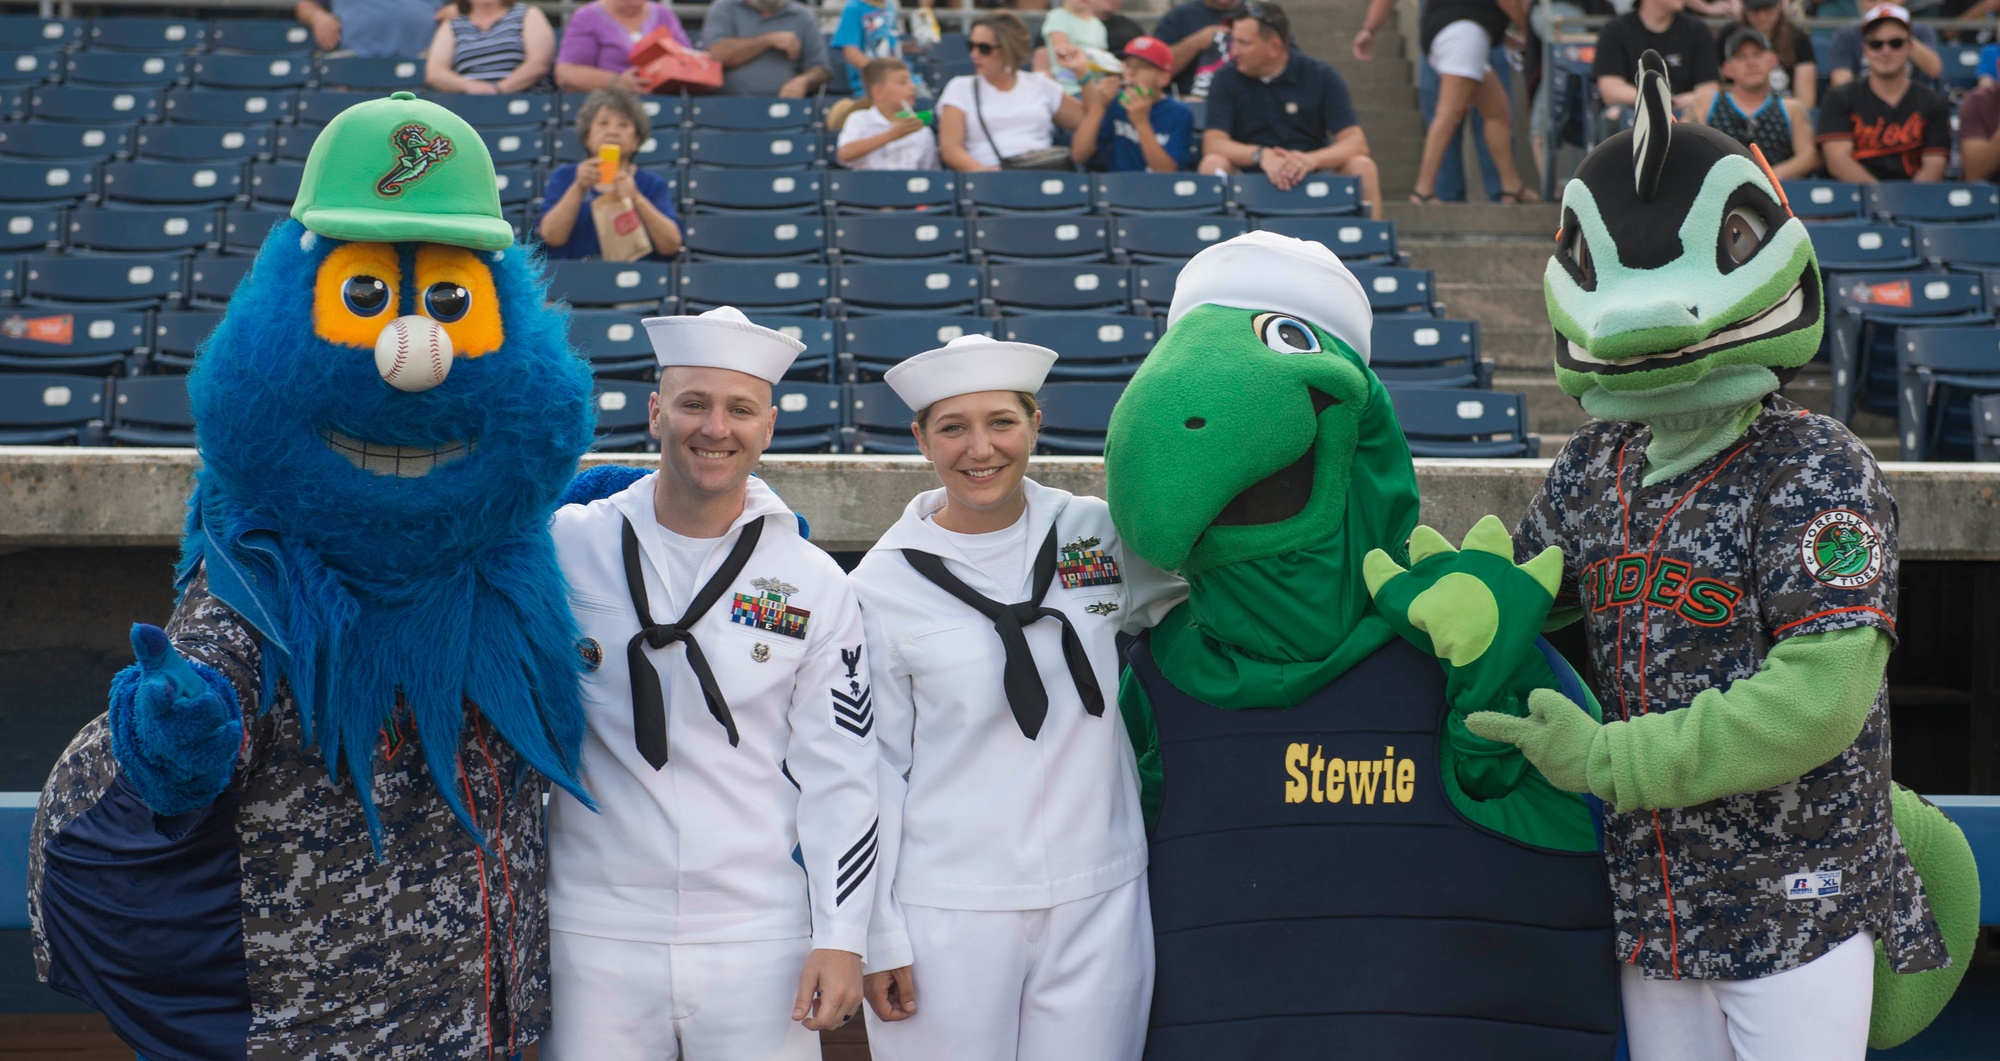 DVIDS - Images - Nimitz Sailors Pose For Photo With Team Mascot